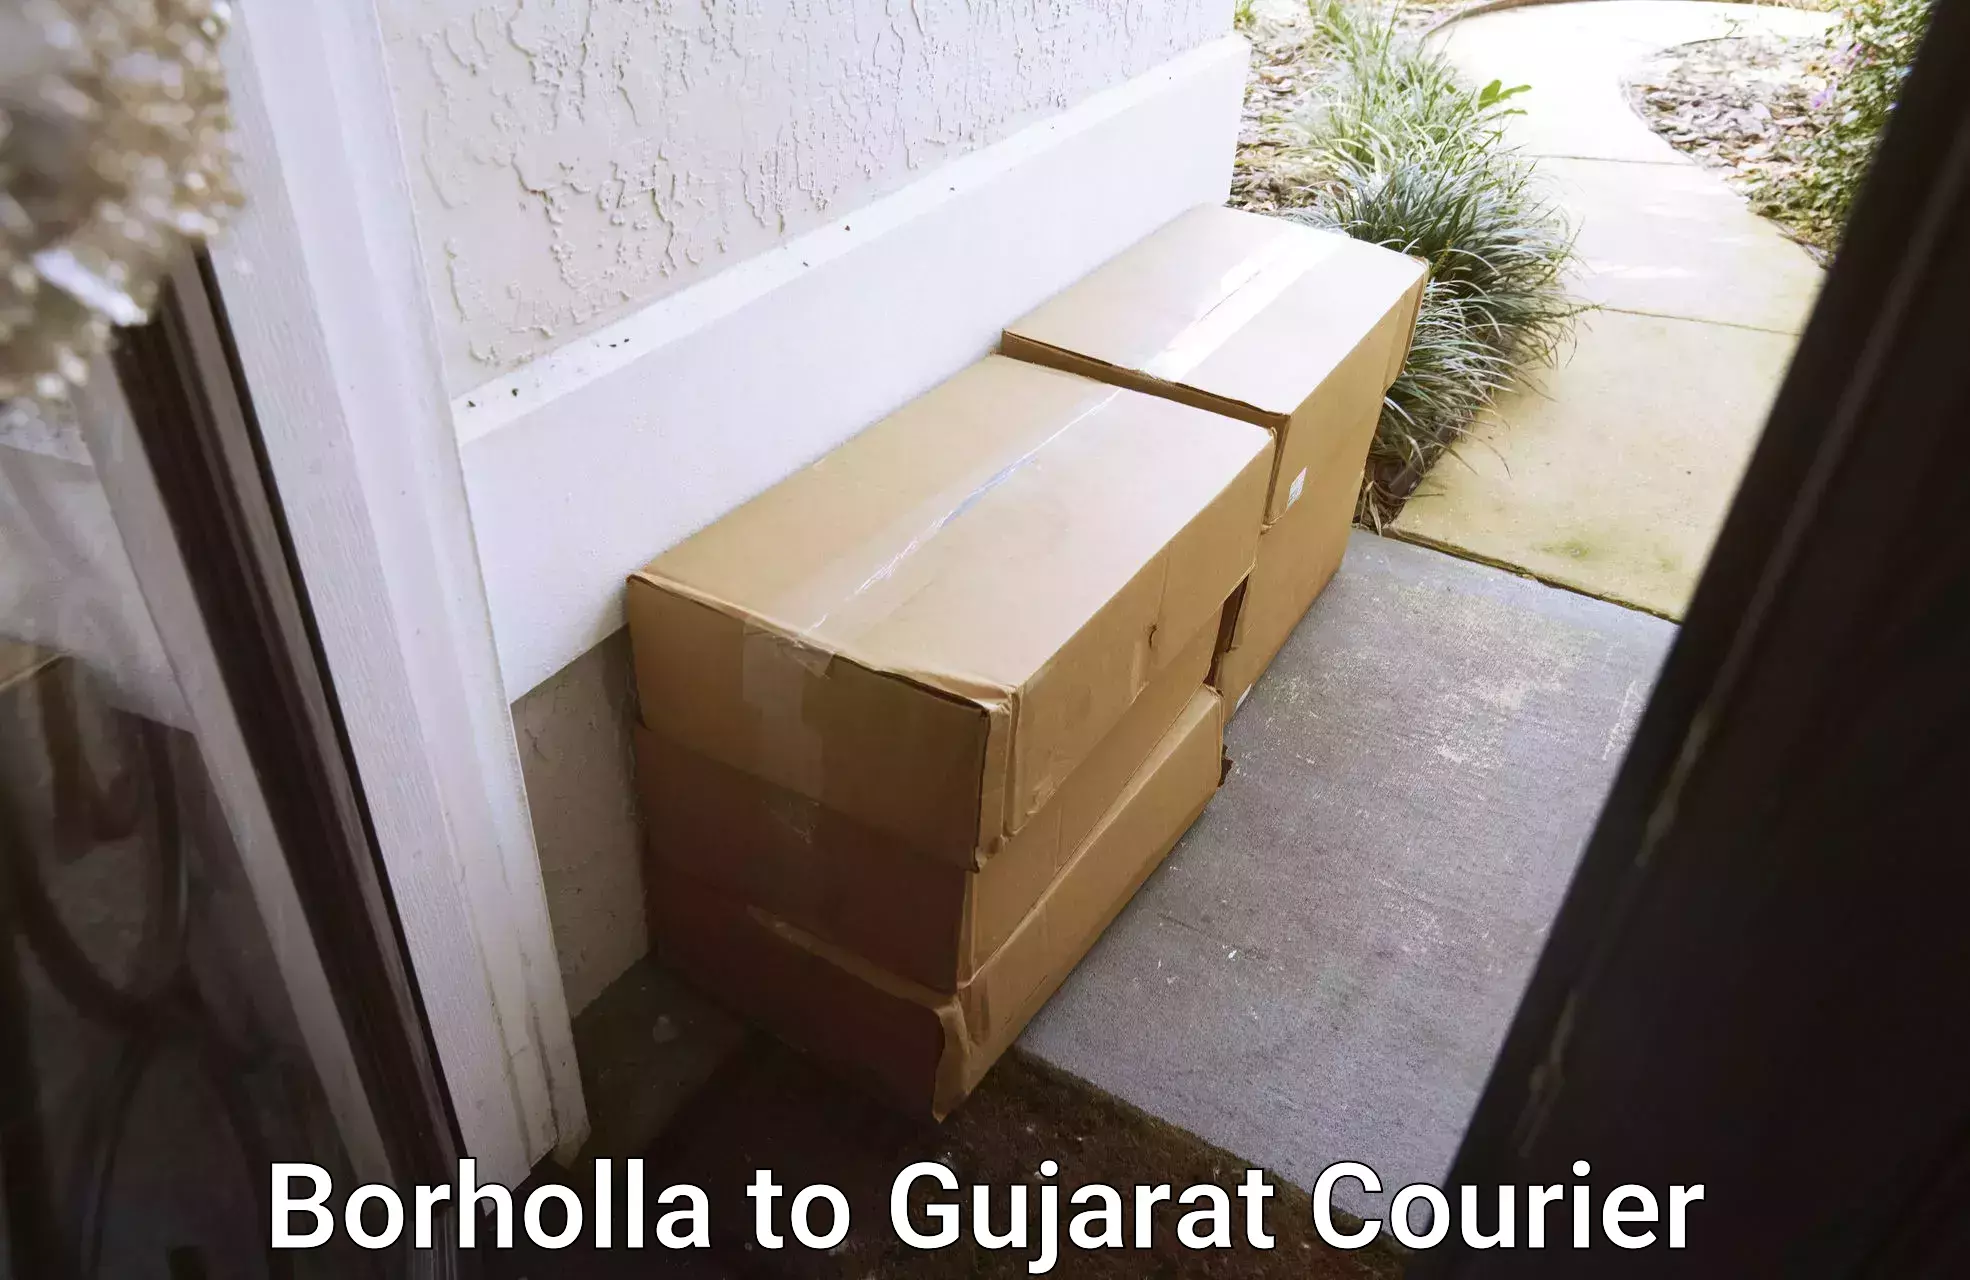 Courier service innovation Borholla to Gujarat